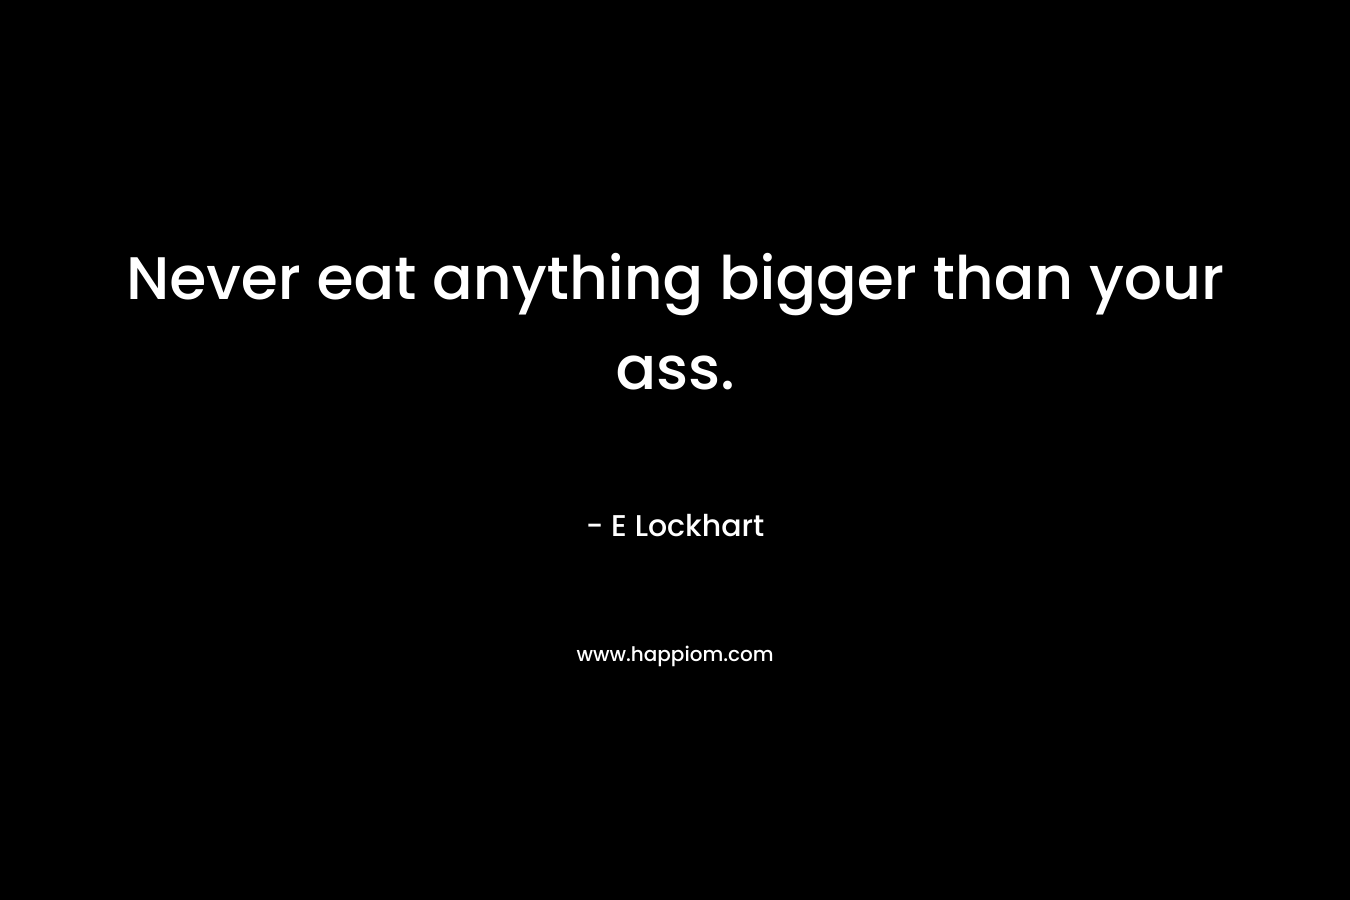 Never eat anything bigger than your ass. – E Lockhart